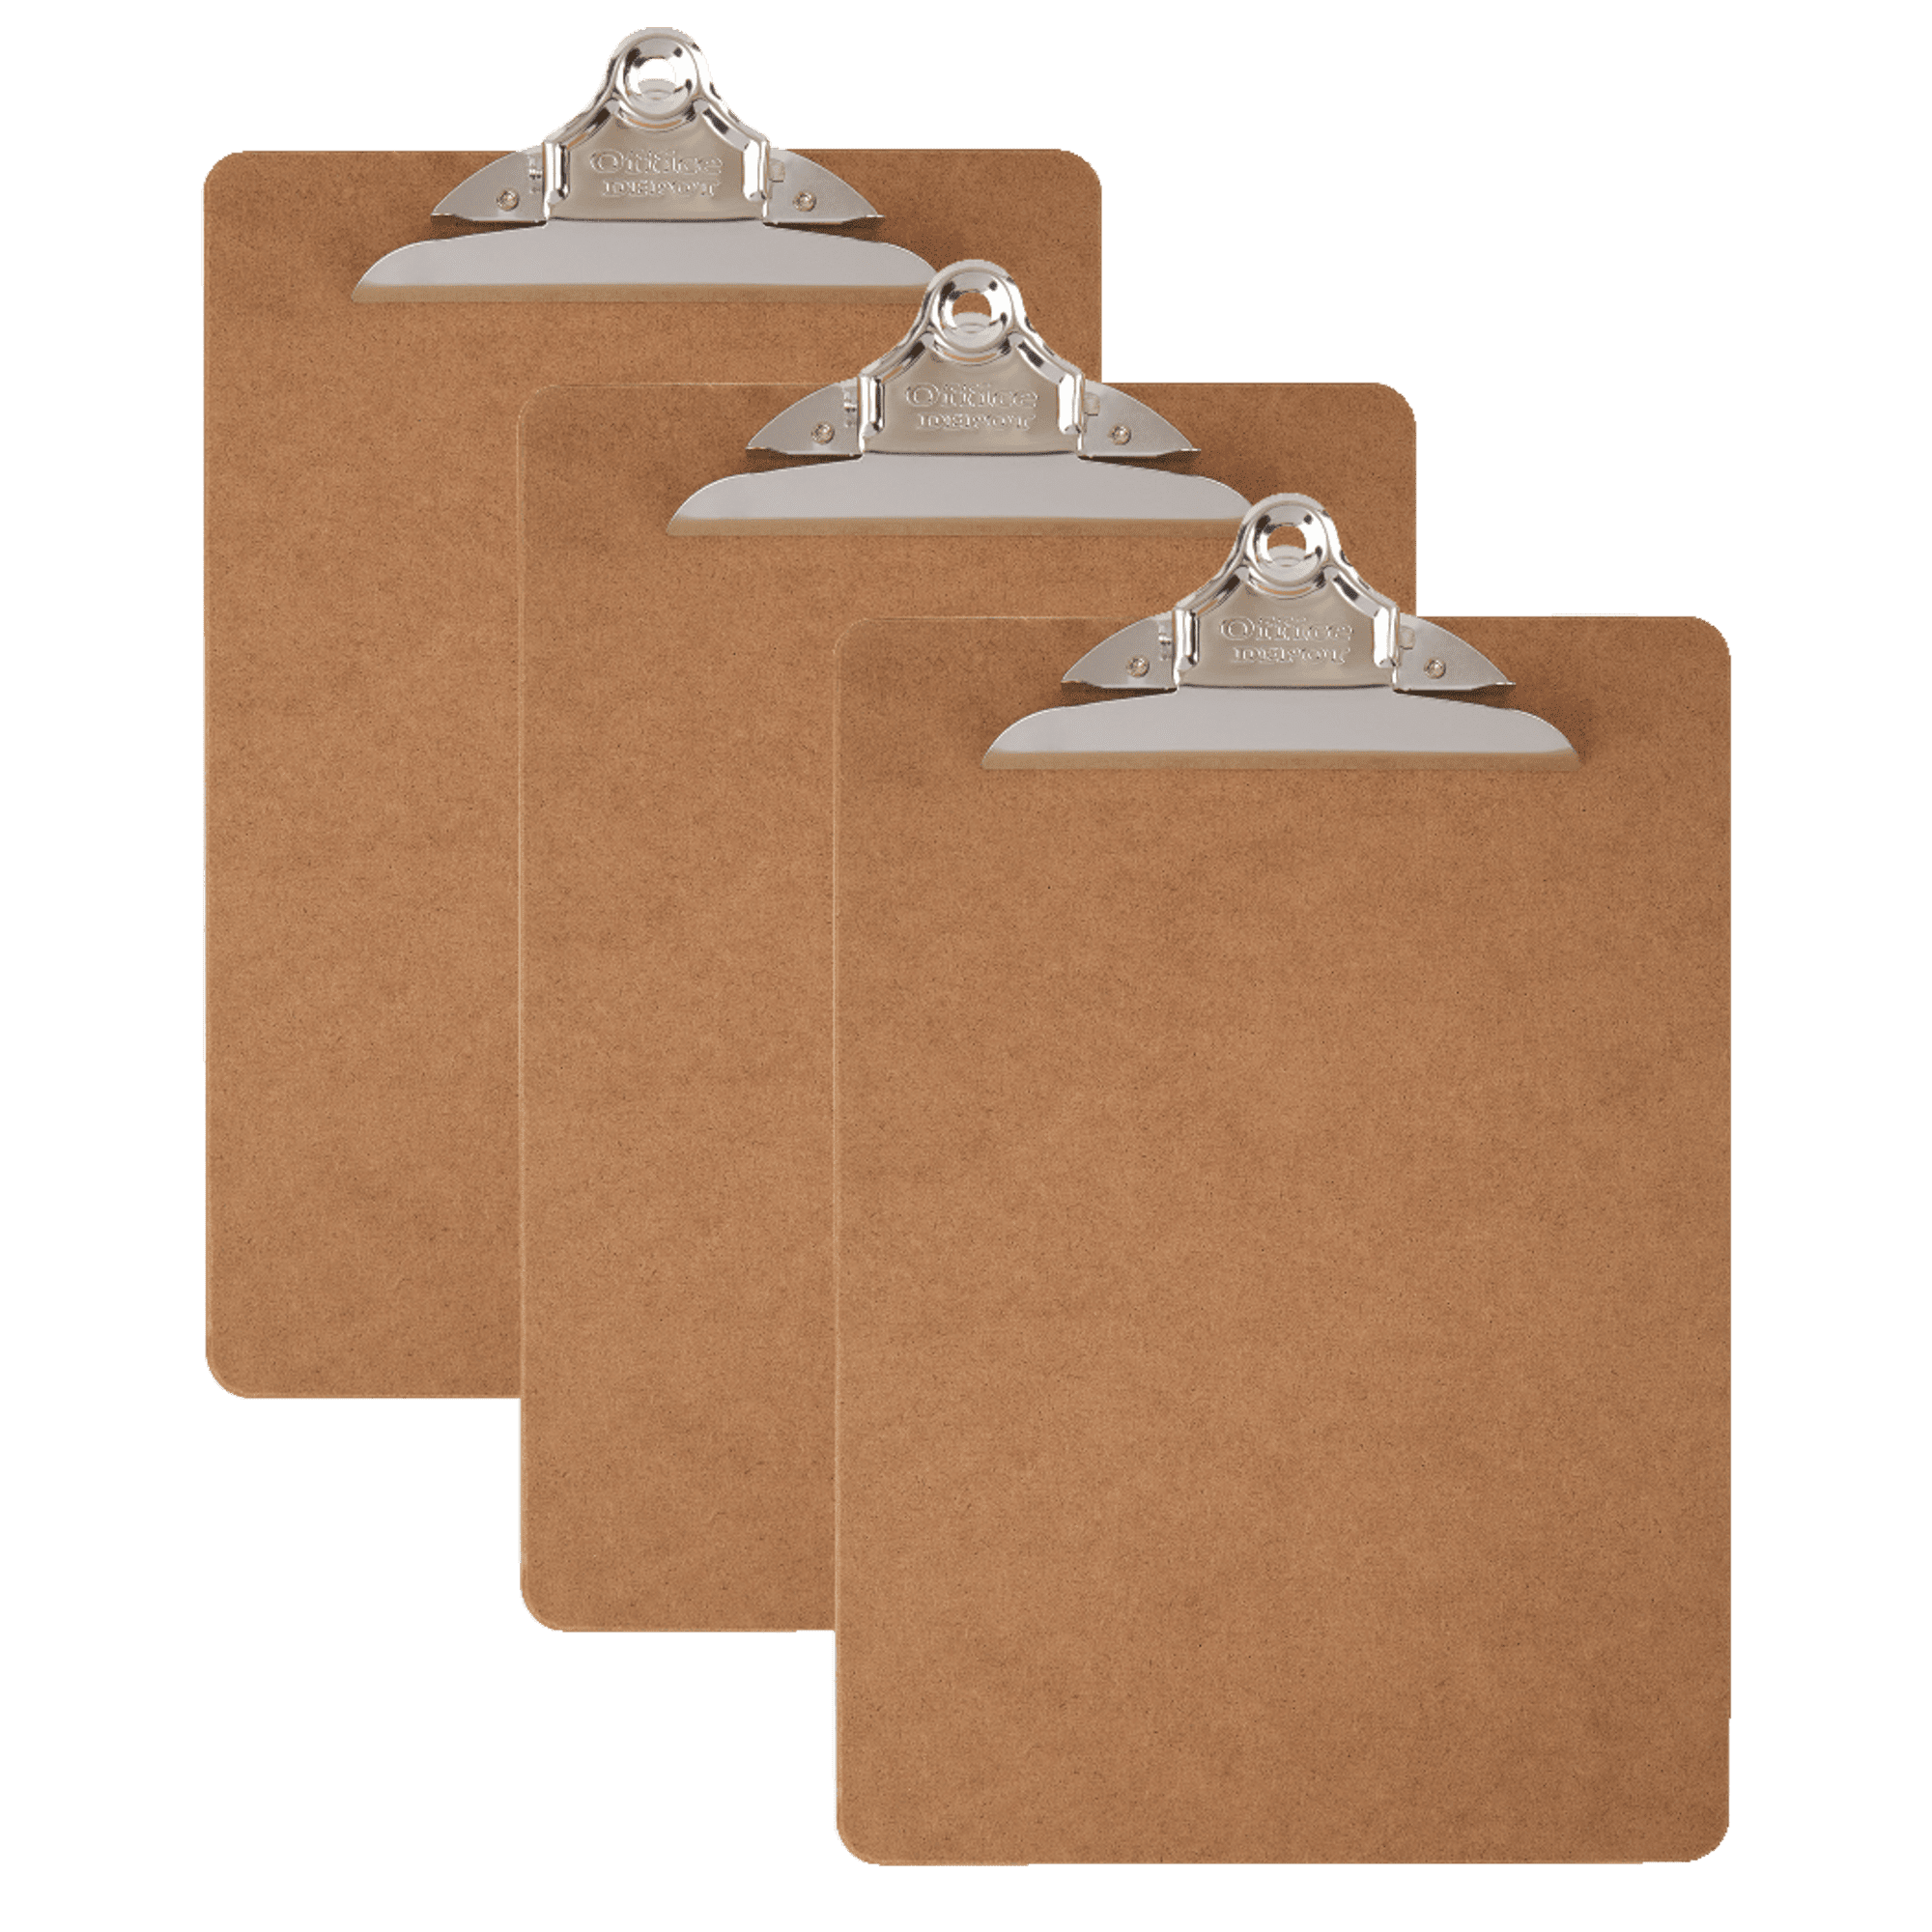 Office Depot Wood Clipboards, Letter Size - 3 pack